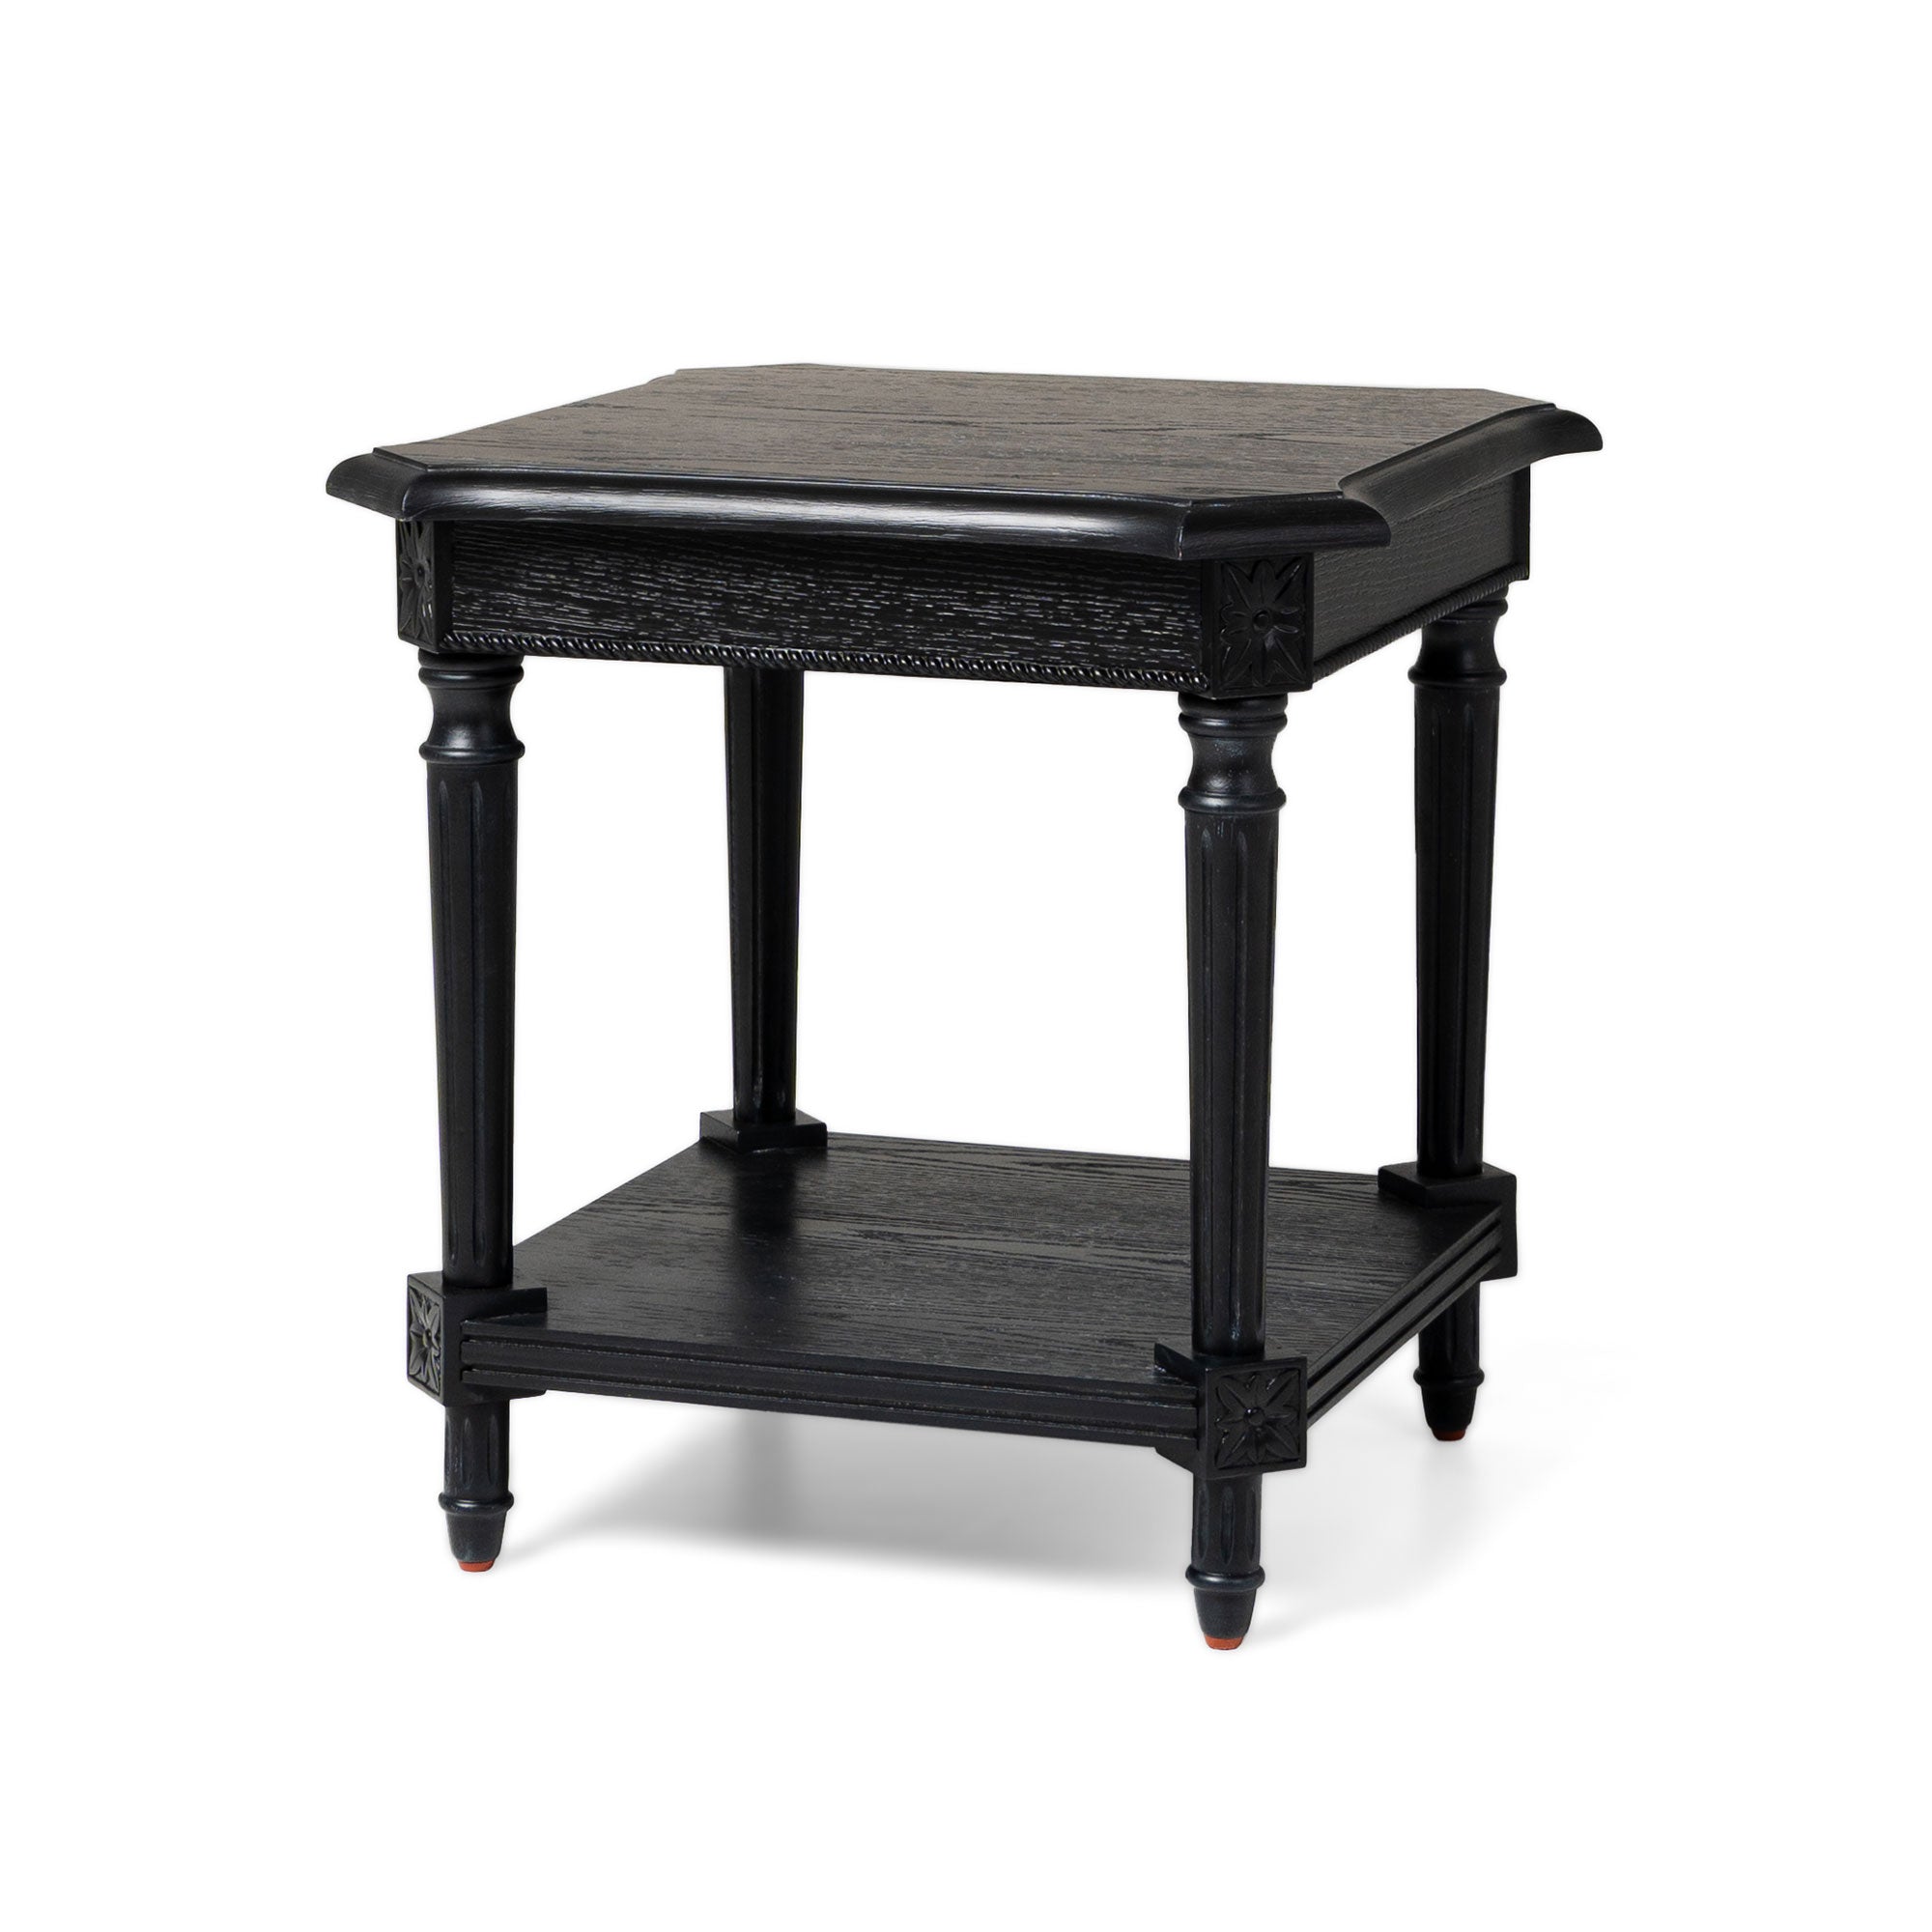 Pullman Traditional Square Wooden Side Table in Antiqued Black Finish in Accent Tables by Maven Lane